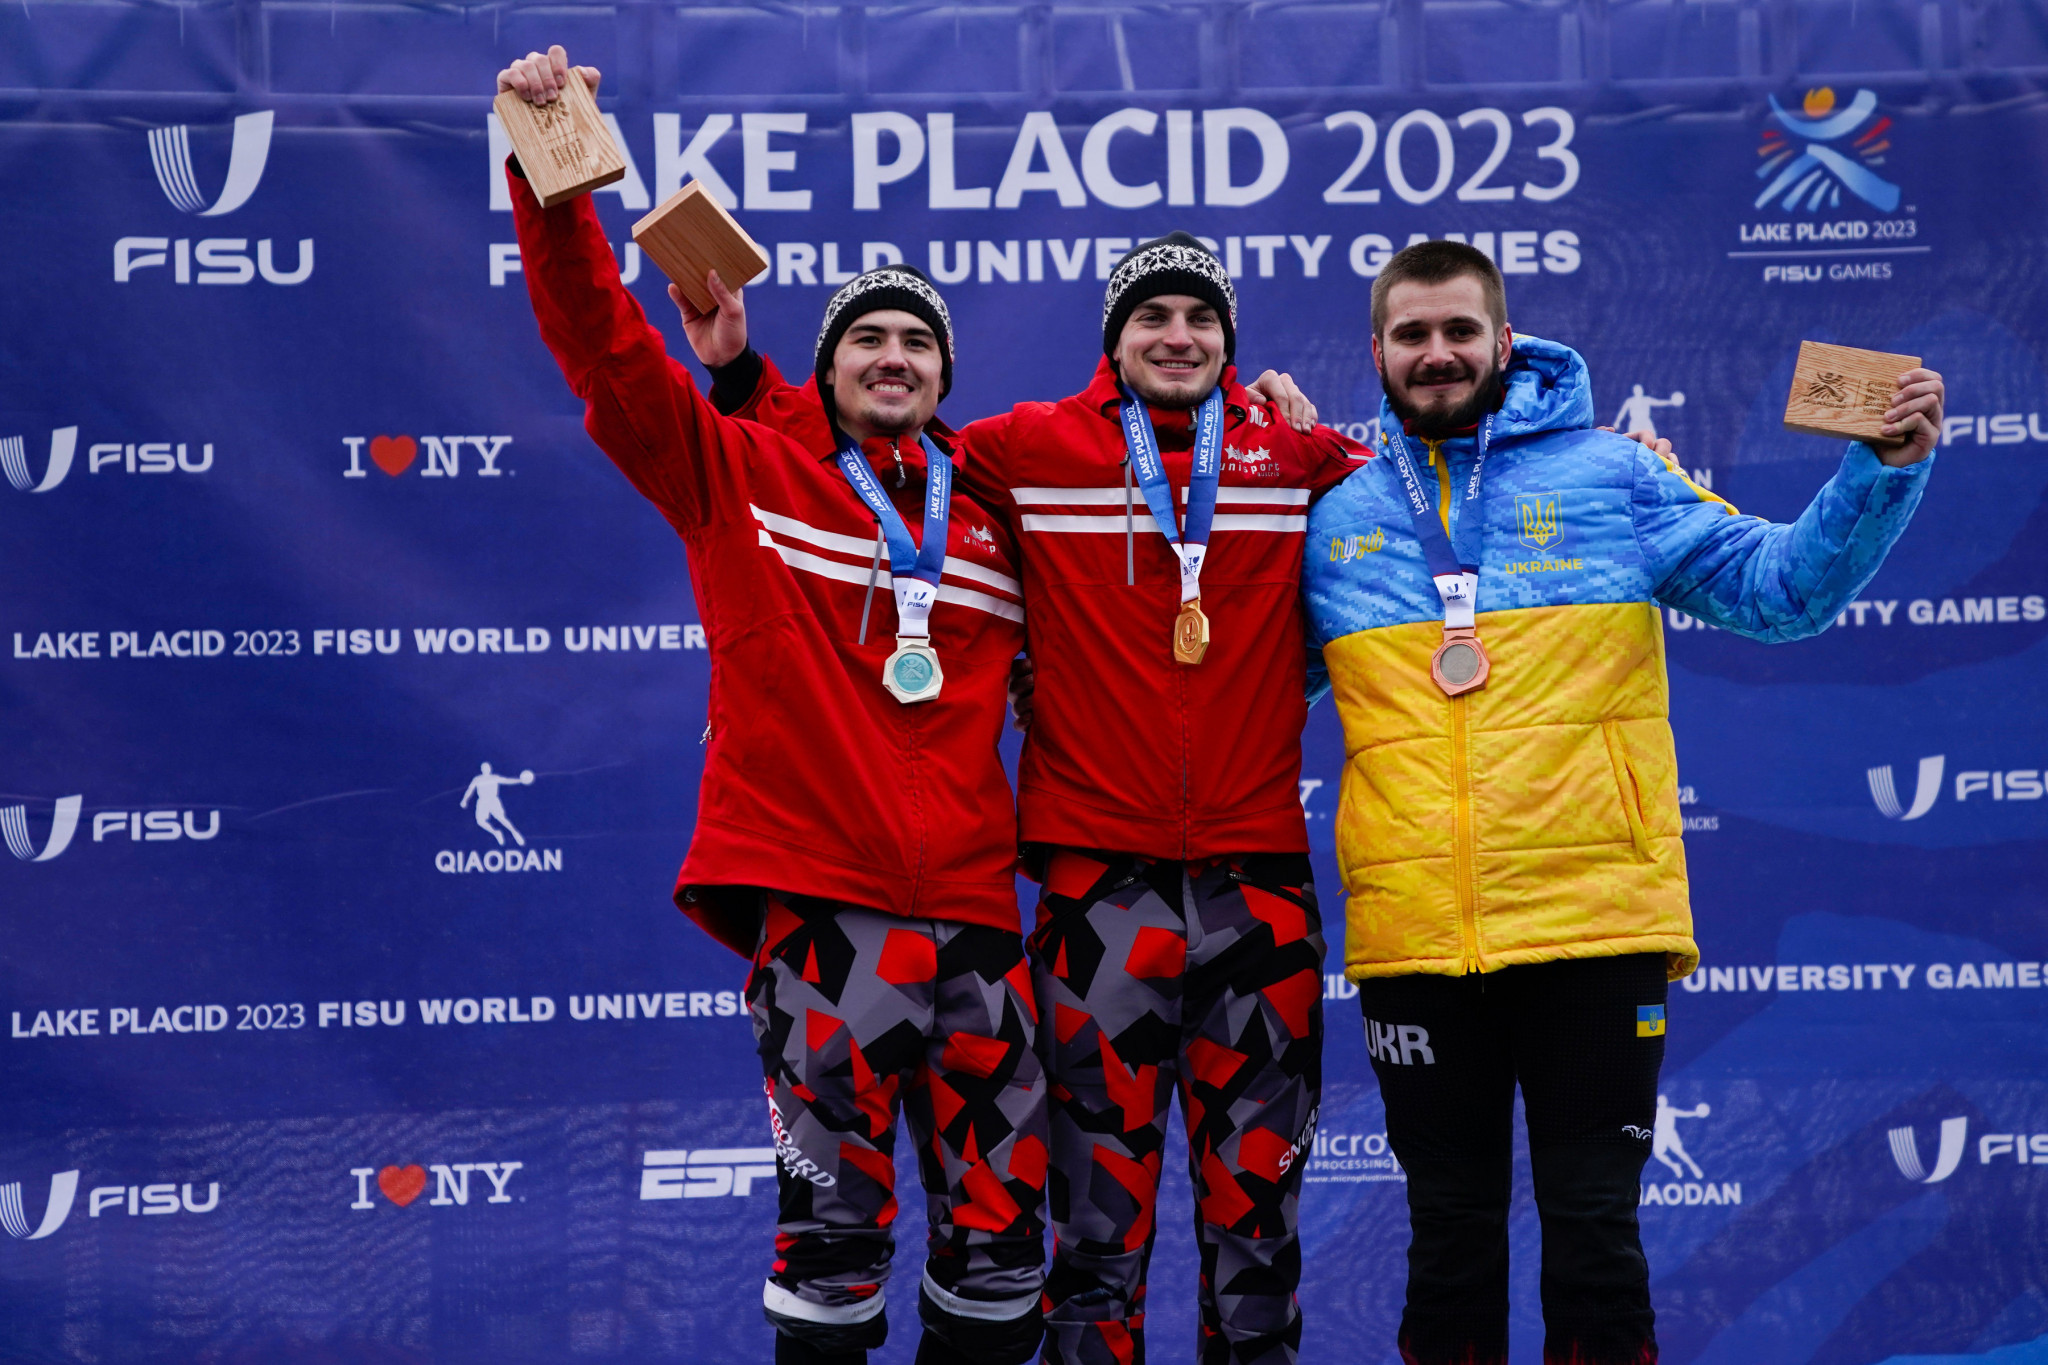 Mykhailo Kharuk claimed bronze in the men's snowboard event for Ukraine to add to the gold he won yesterday in the parallel giant slalom ©FISU